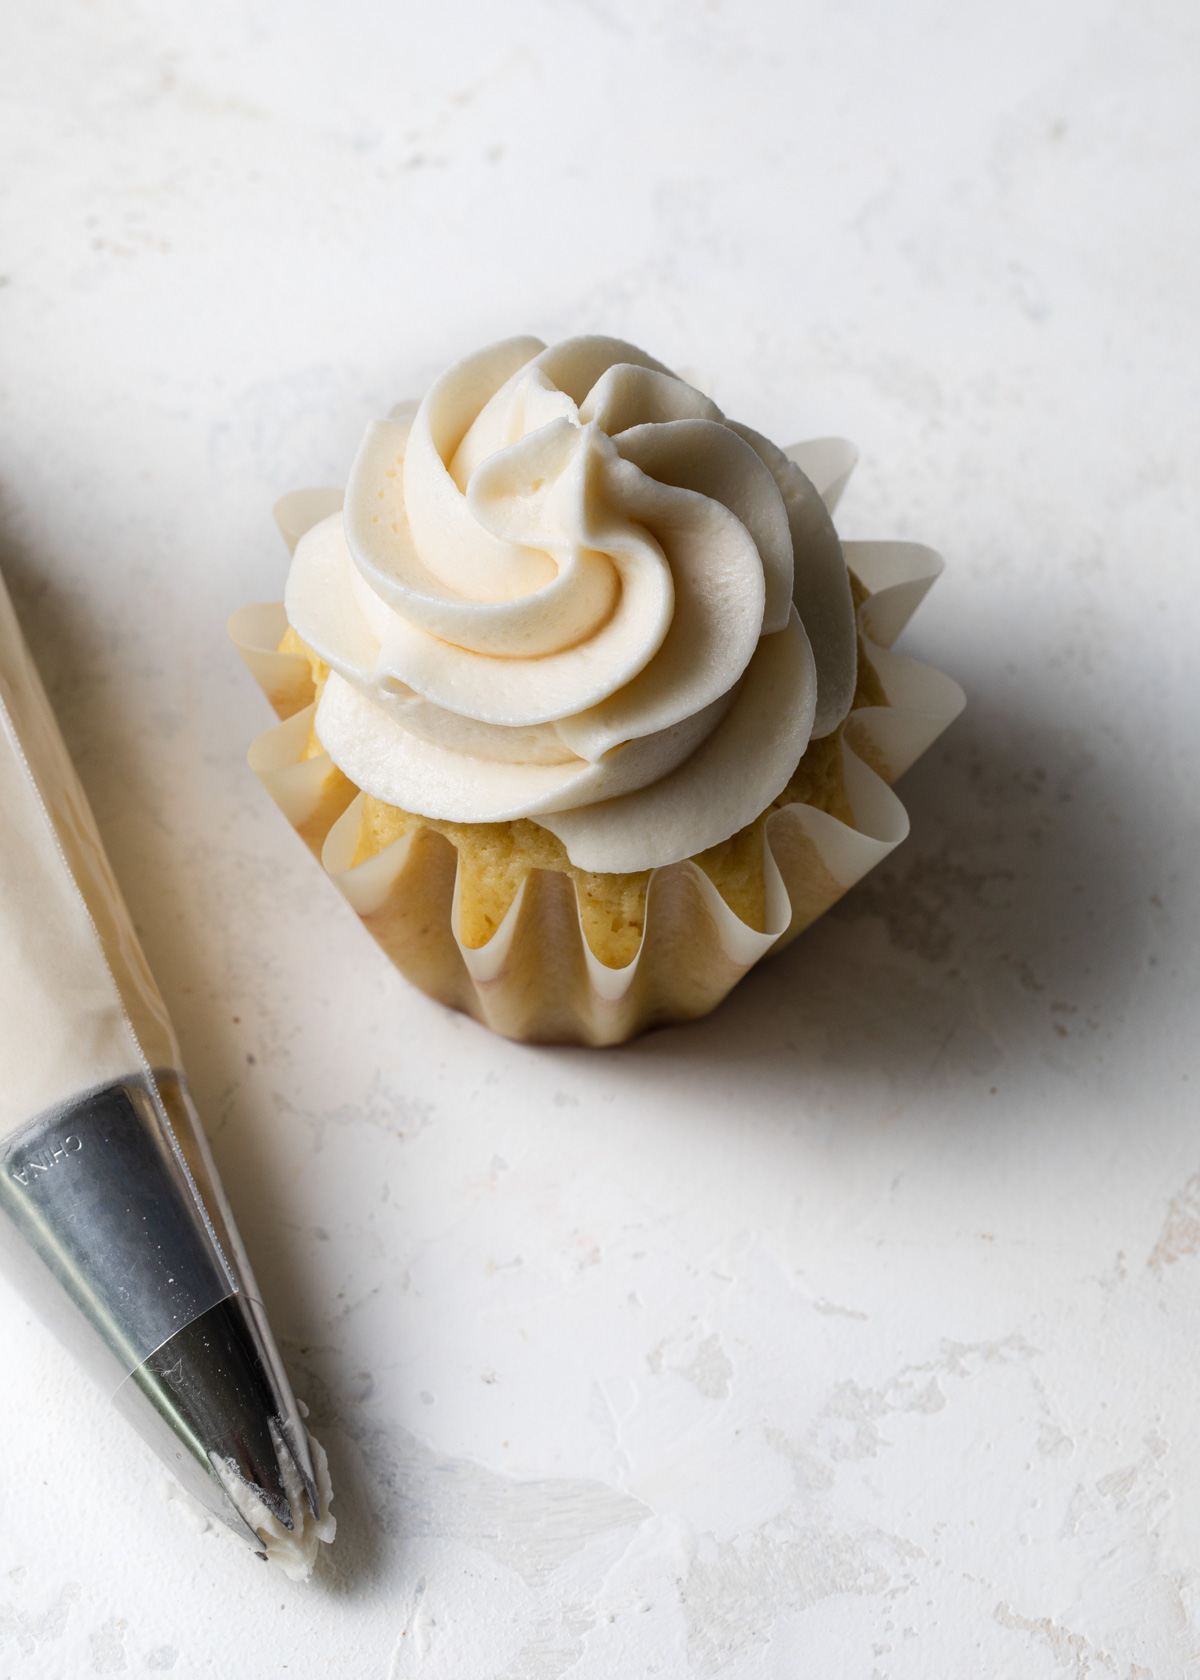 A perfectly piped cupcake with vanilla frosting